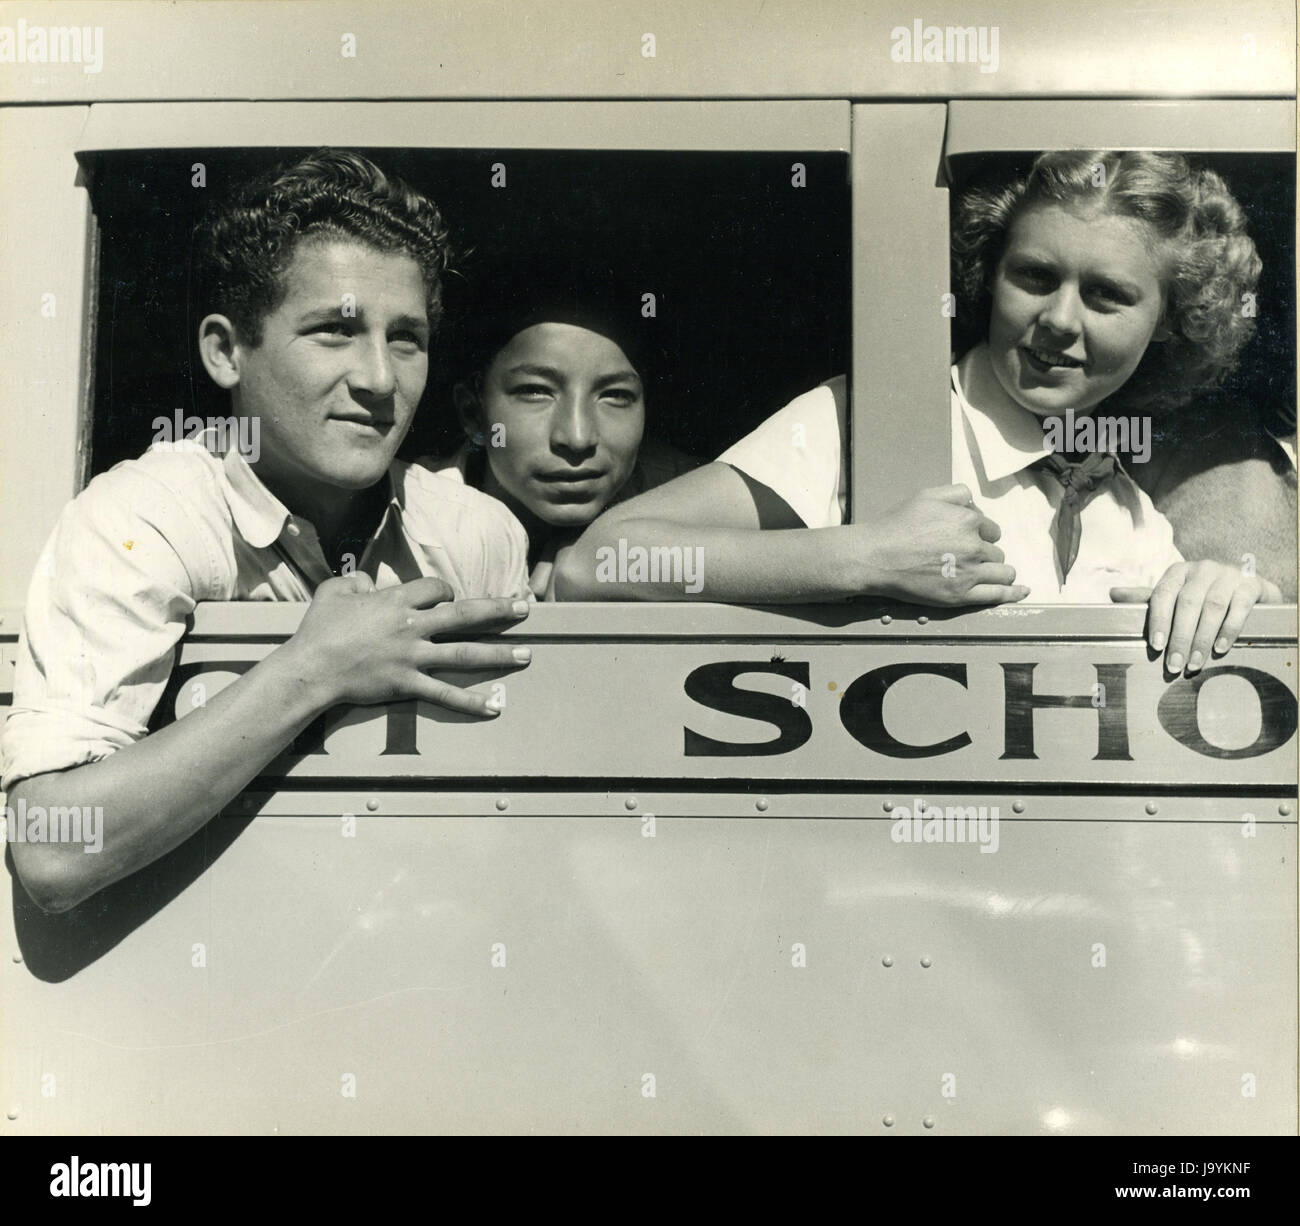 Monterey County, May 2, 1940 - HIgh-School Students from the Salinas Valley ride the school bus to High School. Stock Photo